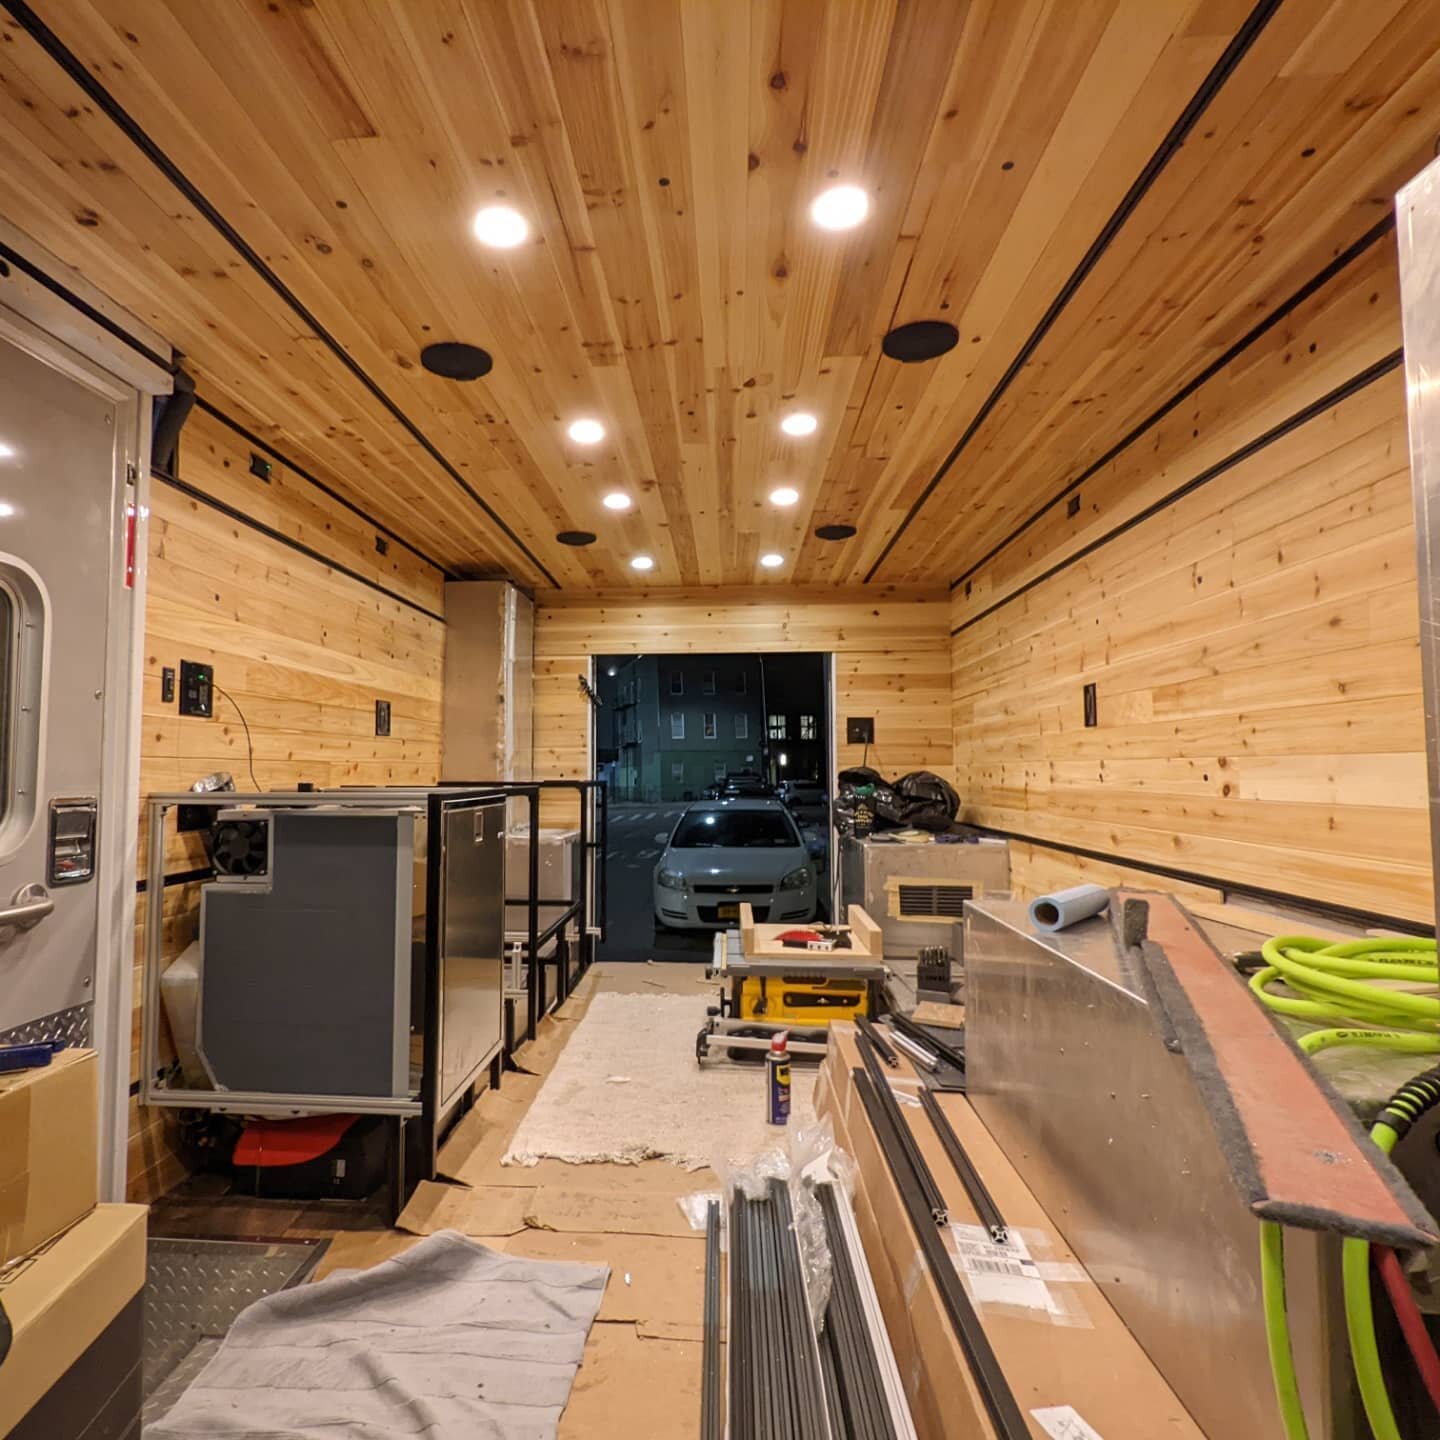 Ambu conversion base layer is done:

1/4&quot; cedar all around, attached to recessed plywood ribs in the ceiling, and attached to solid 1/4&quot; plywood on the walls. The wall panels are easy to unbolt to get behind, the ceiling panels are also the